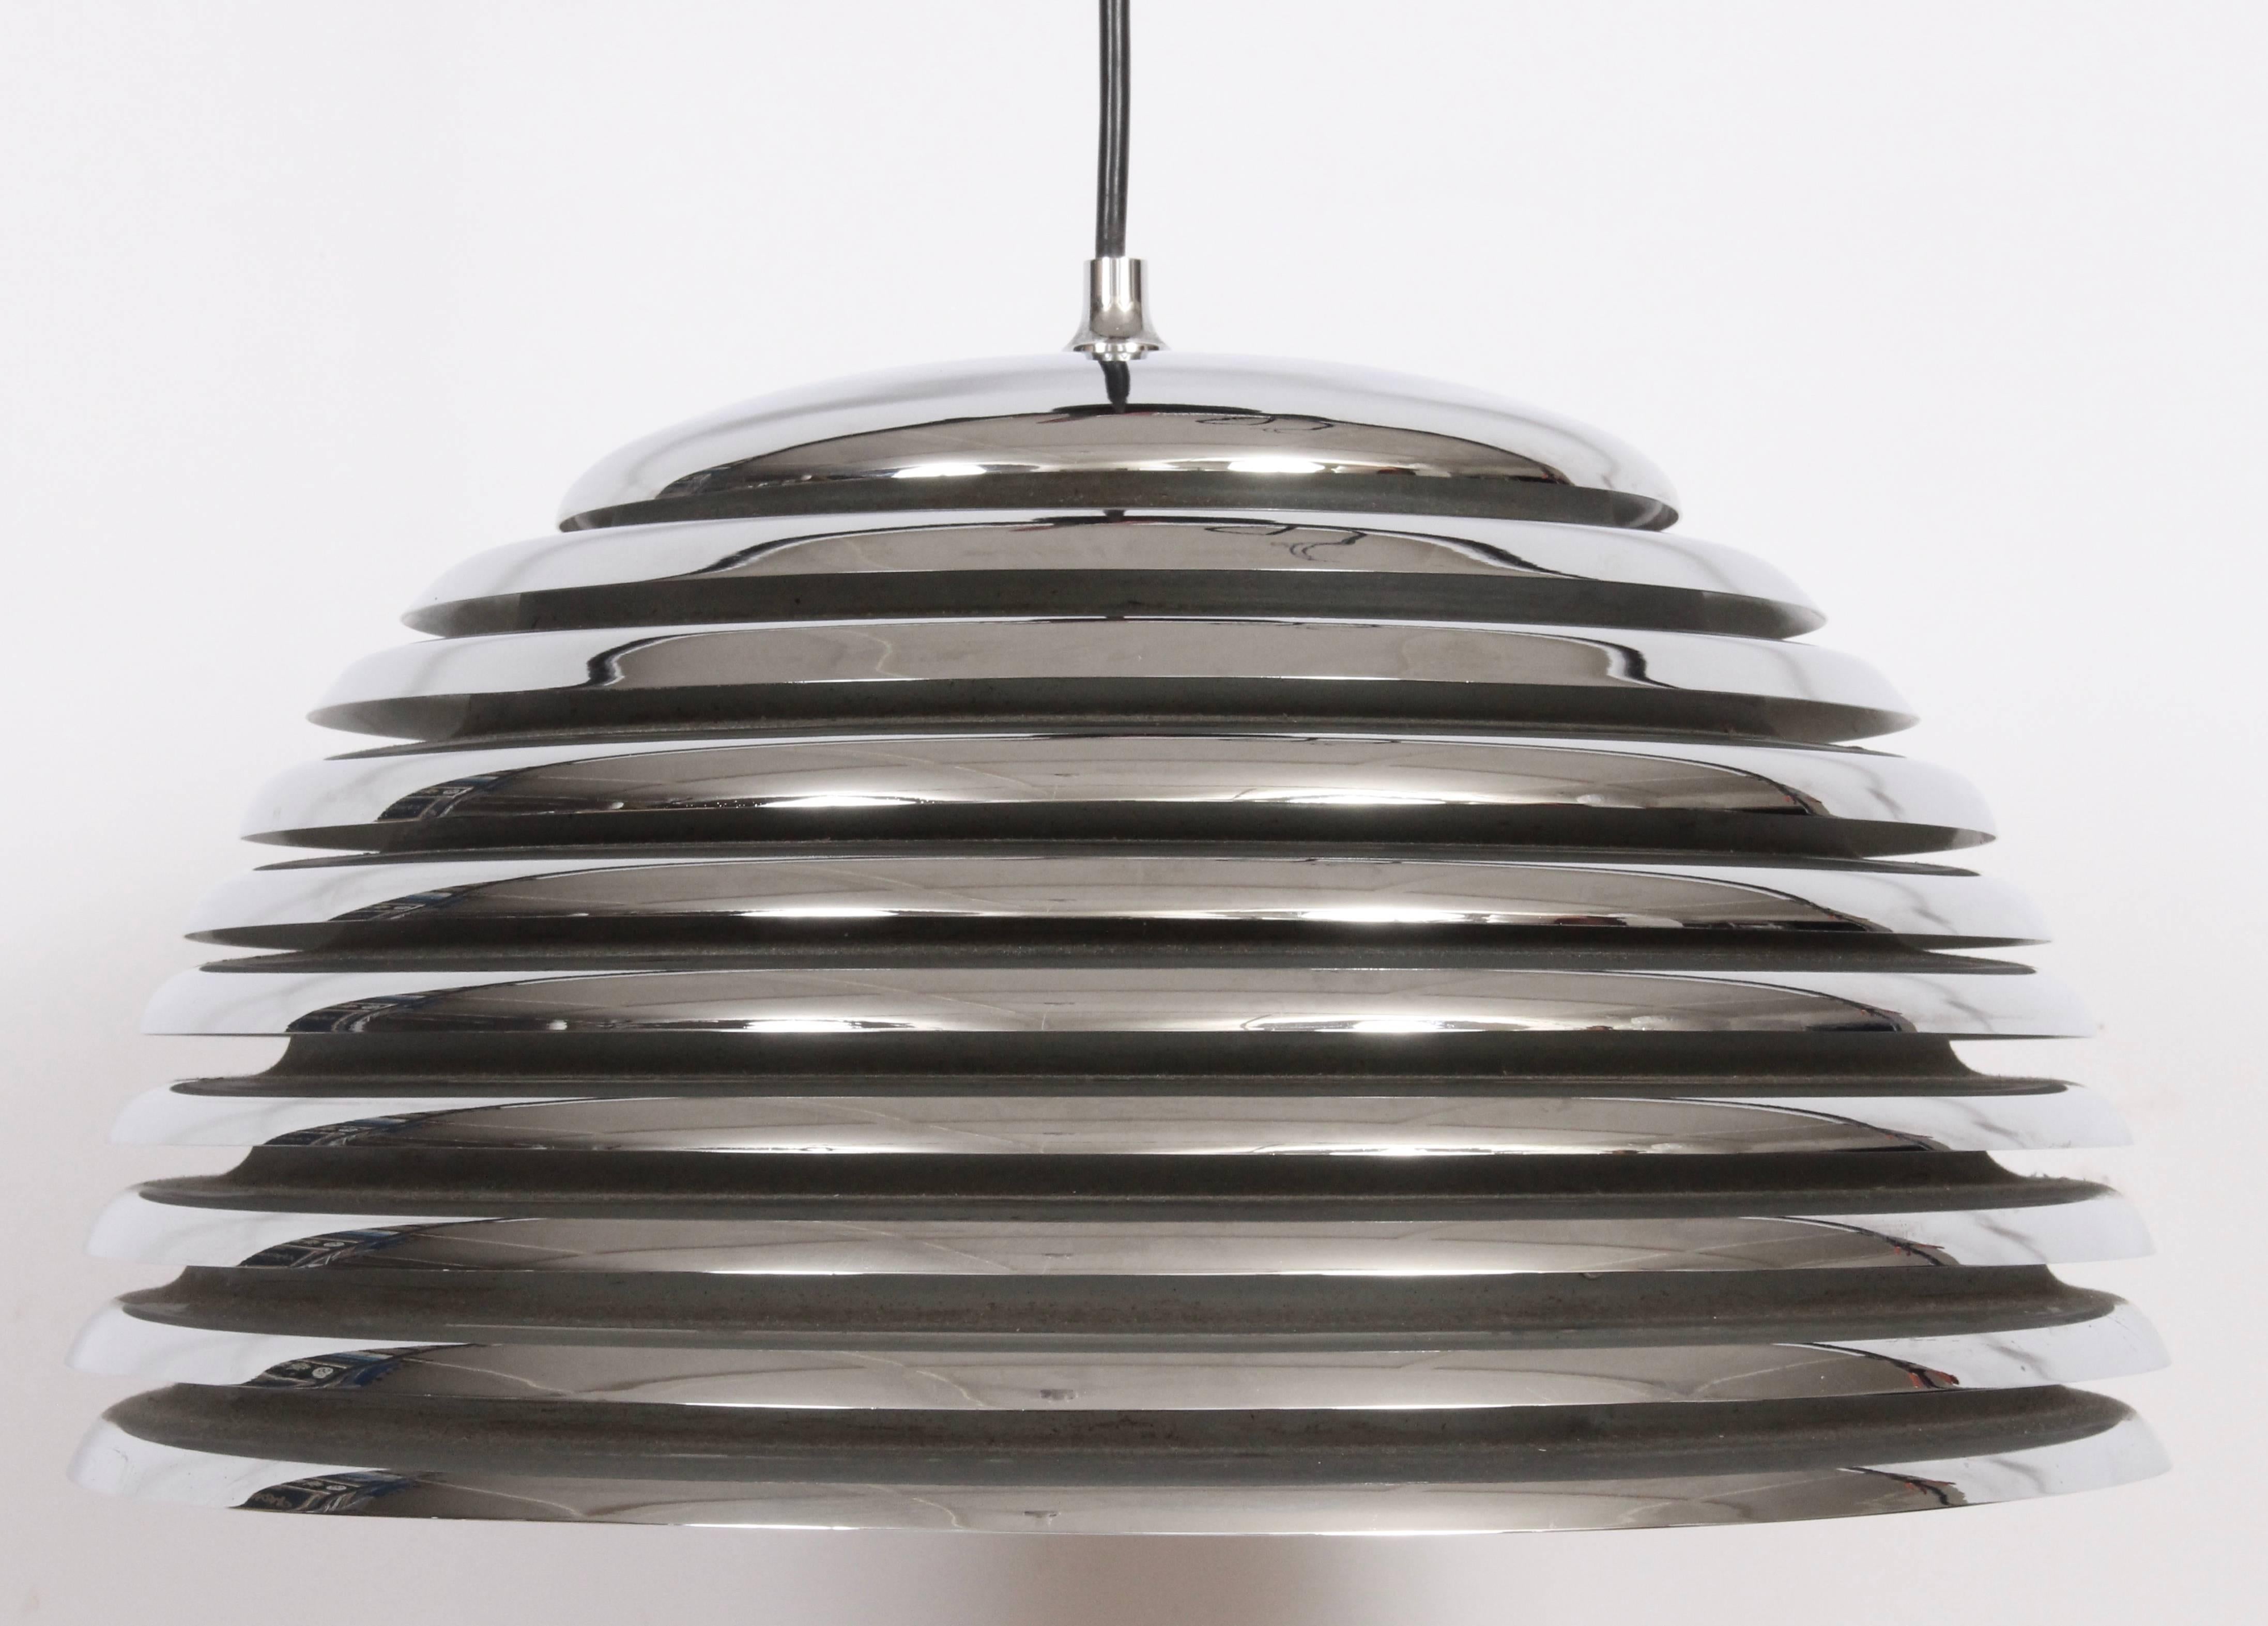 Saturno Chrome Honeycomb Pendant by Kazuo Motozawa for Staff Leutchen, Germany. Featuring reflective, rounded and vented chrome exterior rimmed rings with off white interior. Diffused light. Standard socket. Black cord. Classic. Fine design. Small